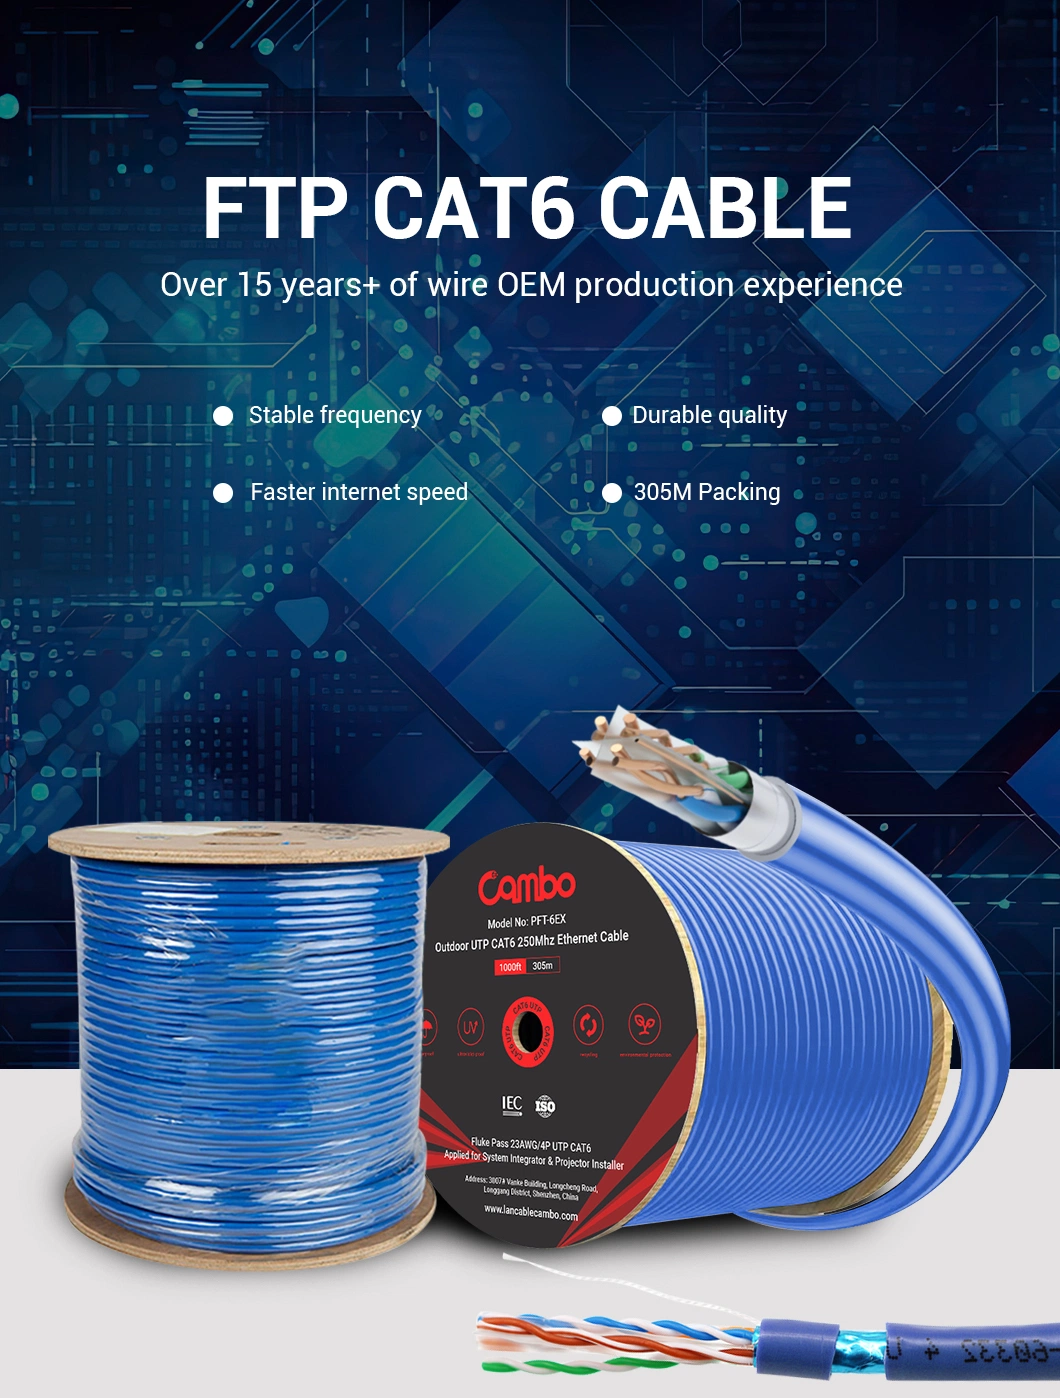 FTP CAT6 Cable Factory Price Pure Copper Manufacturer Wholesale Price Specialize in FTP Category 6 Cable 23AWG 0.56mm, 0.52mm, 0.48mm